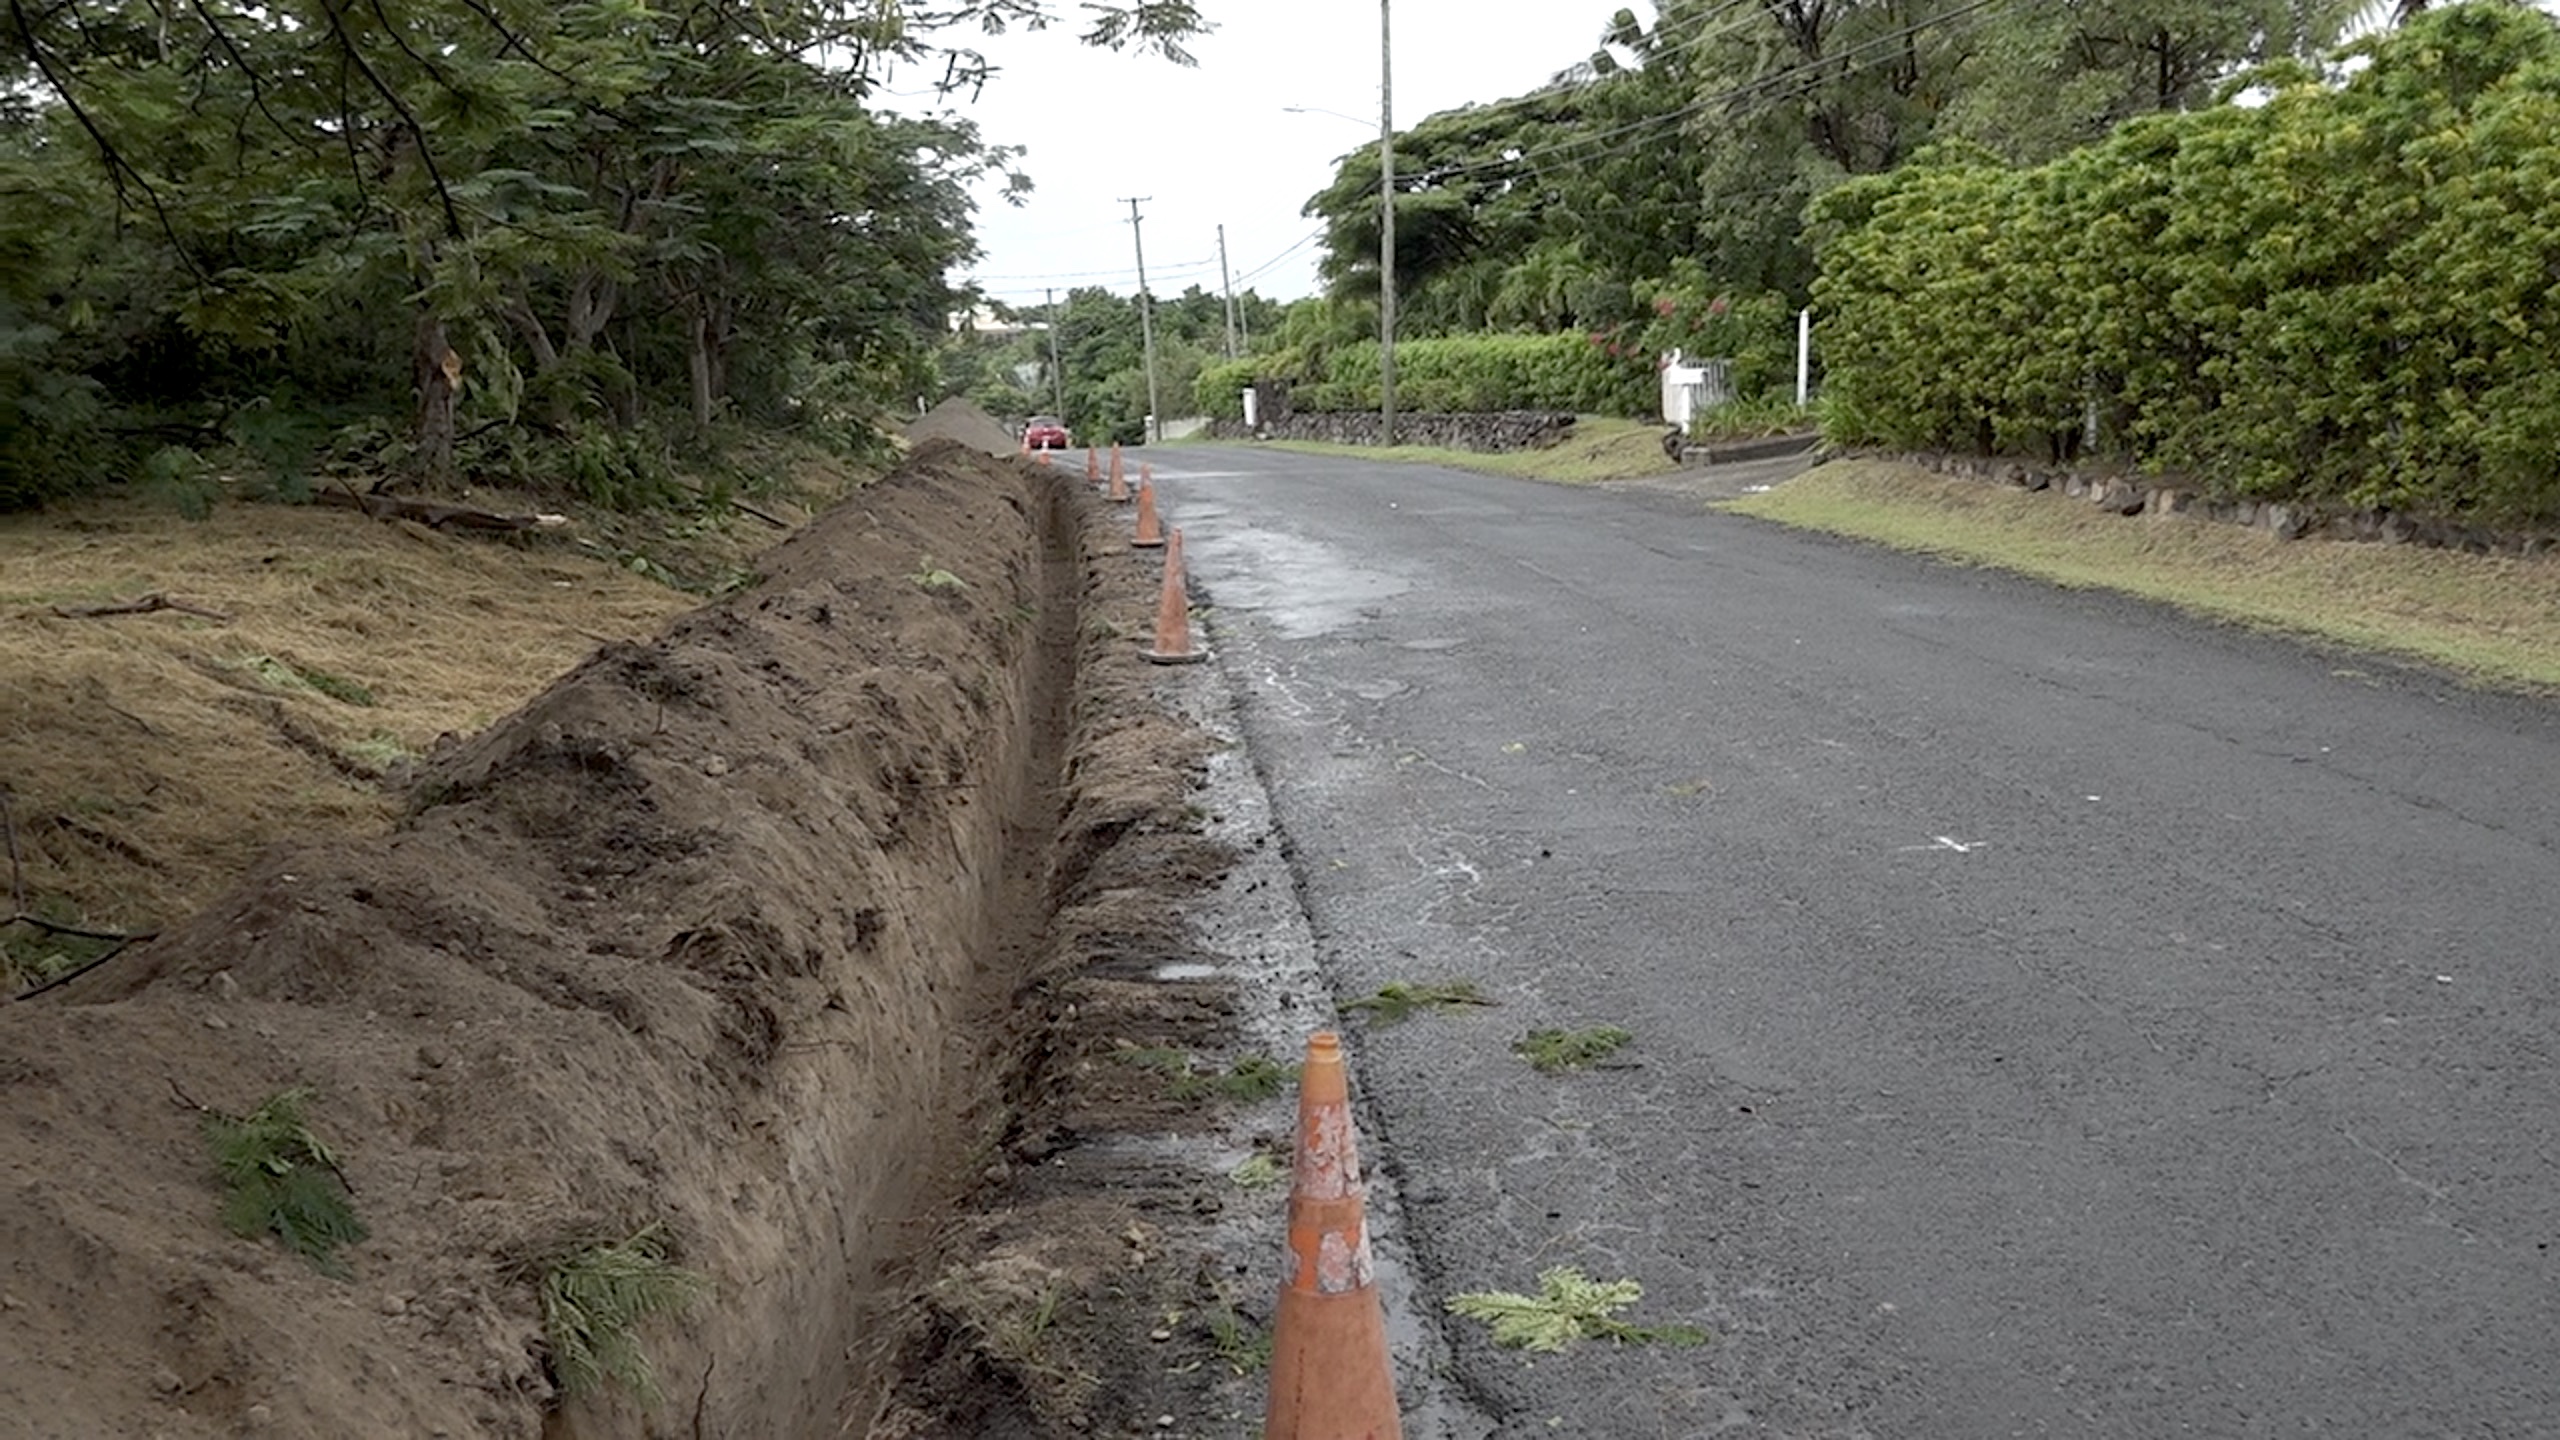 The Nevis Water Department’s Projects Team preparing trenches for installation of water mains at Cliffdwellers on November 07, 2022, as part of the Island Main Road Rehabilitation and Safety Improvement Project